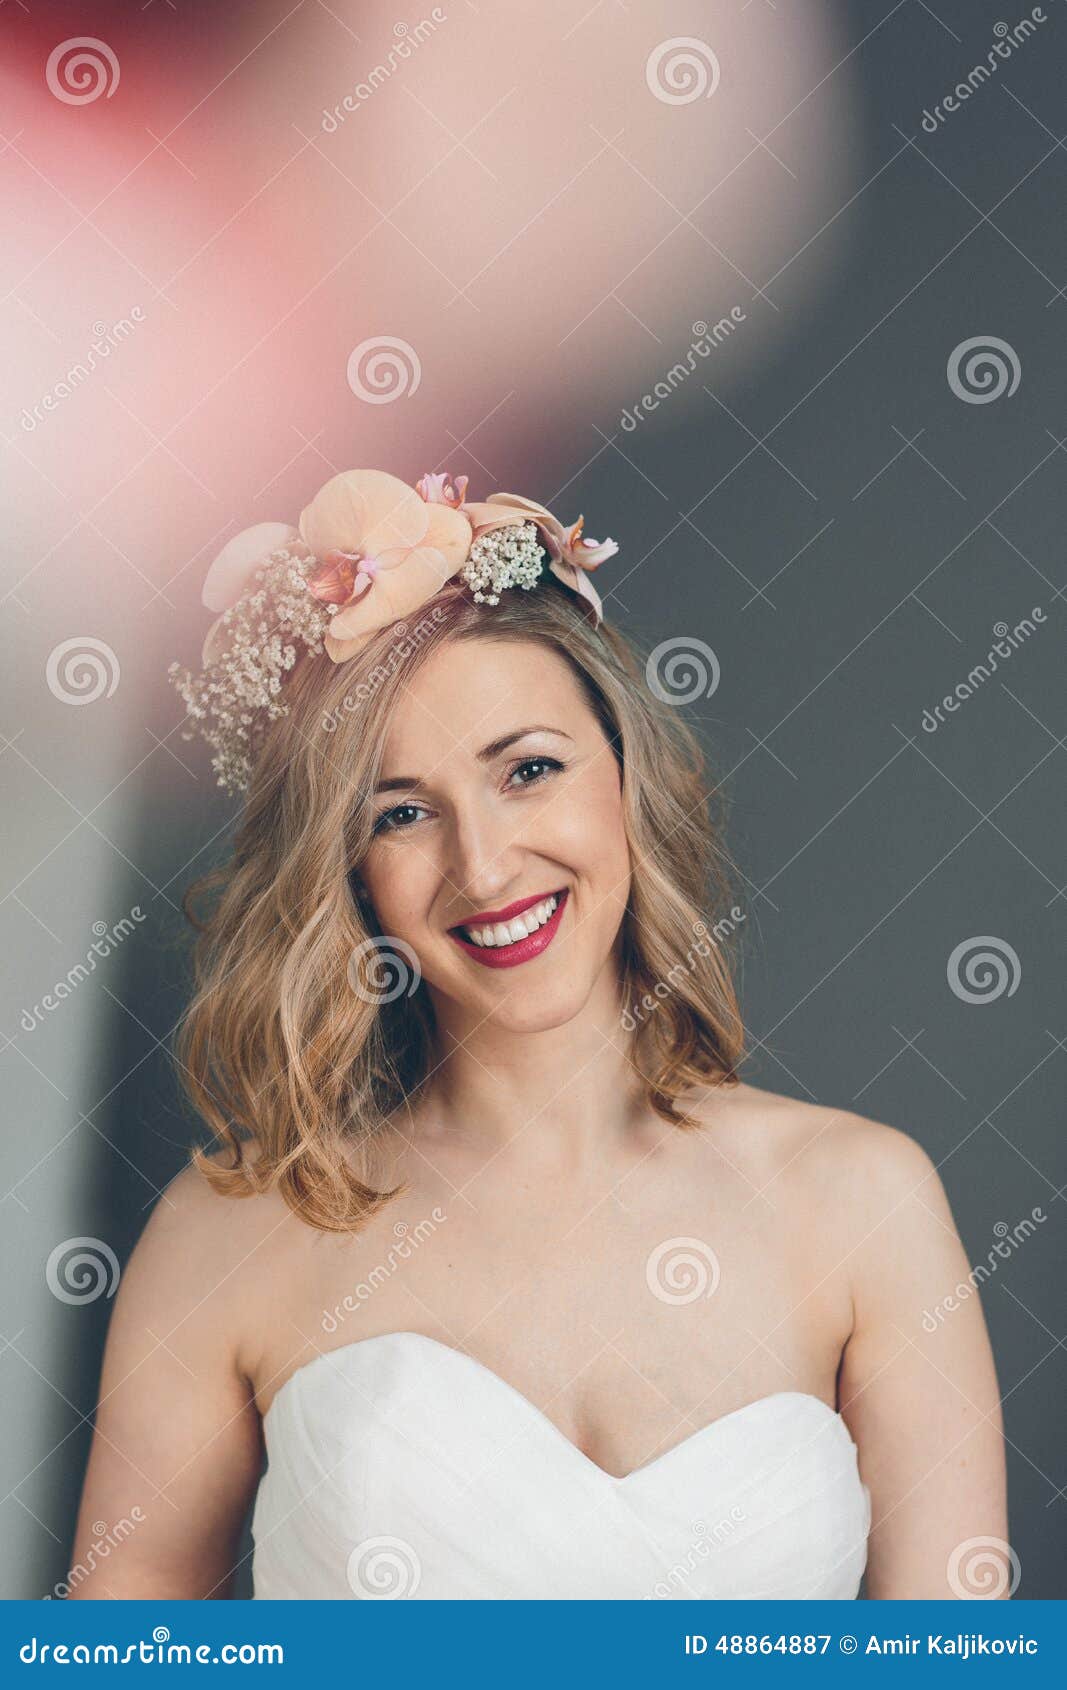 Expression On The Bride 8